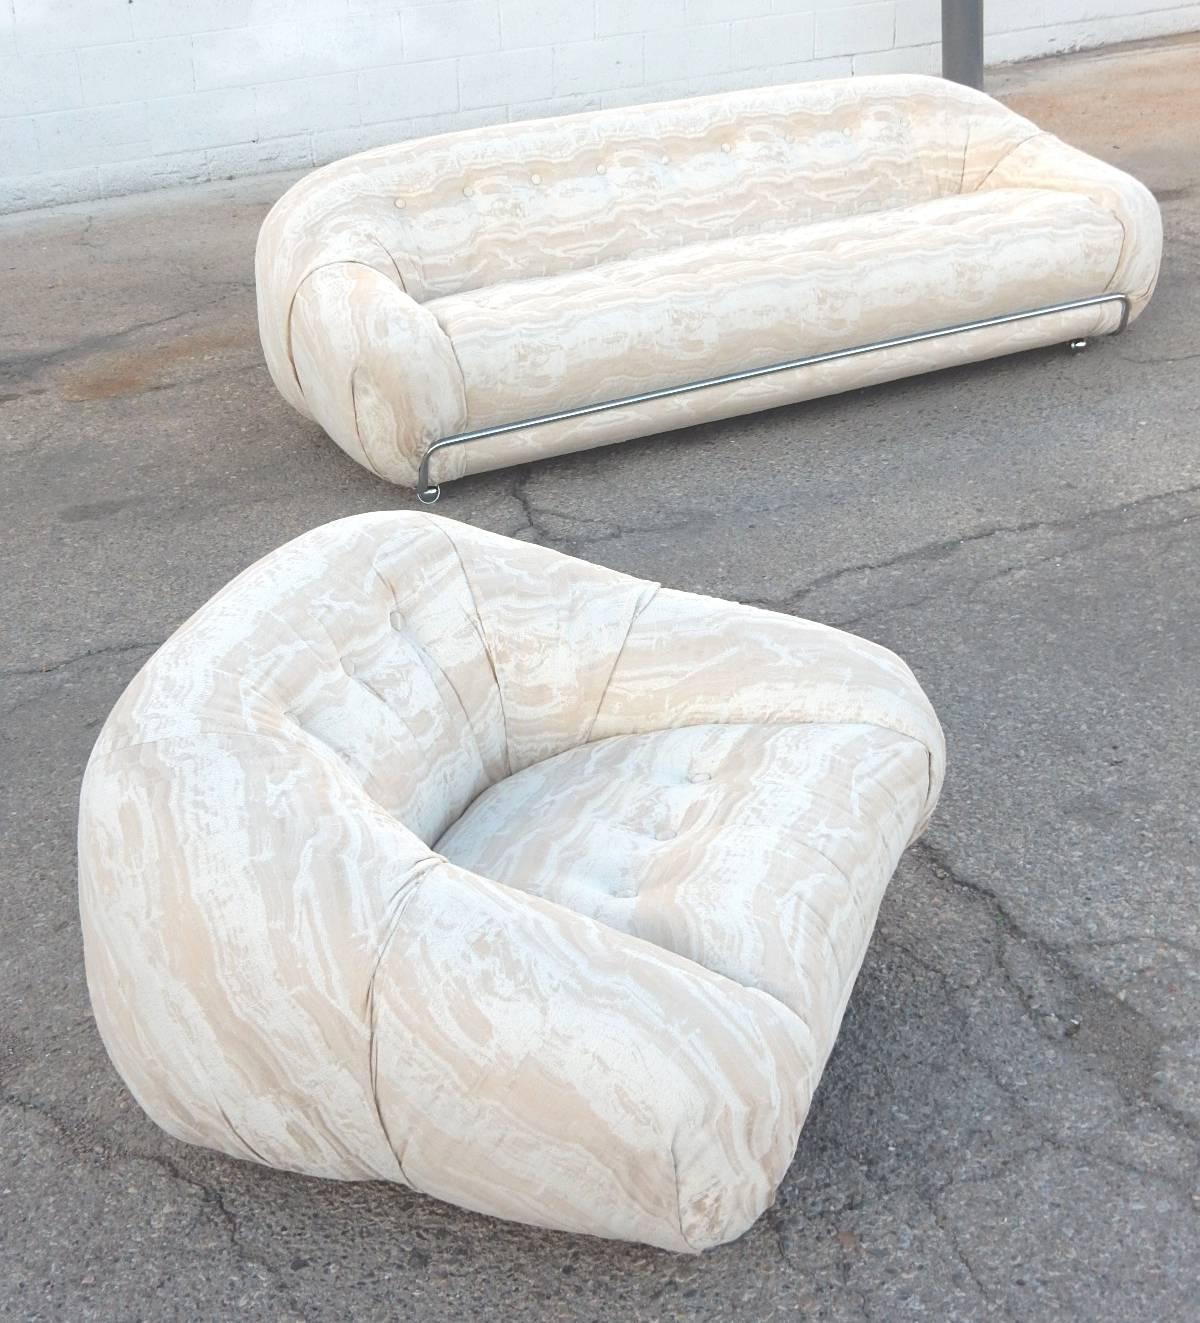 Matching sofa and lounge chair in the manner of Tobia Scarpa.
Italian design, circa 1970s, this set is in immaculate condition upholstered in
the highest quality vintage natural tone marble print fabric.
Chrome tube across front floating on